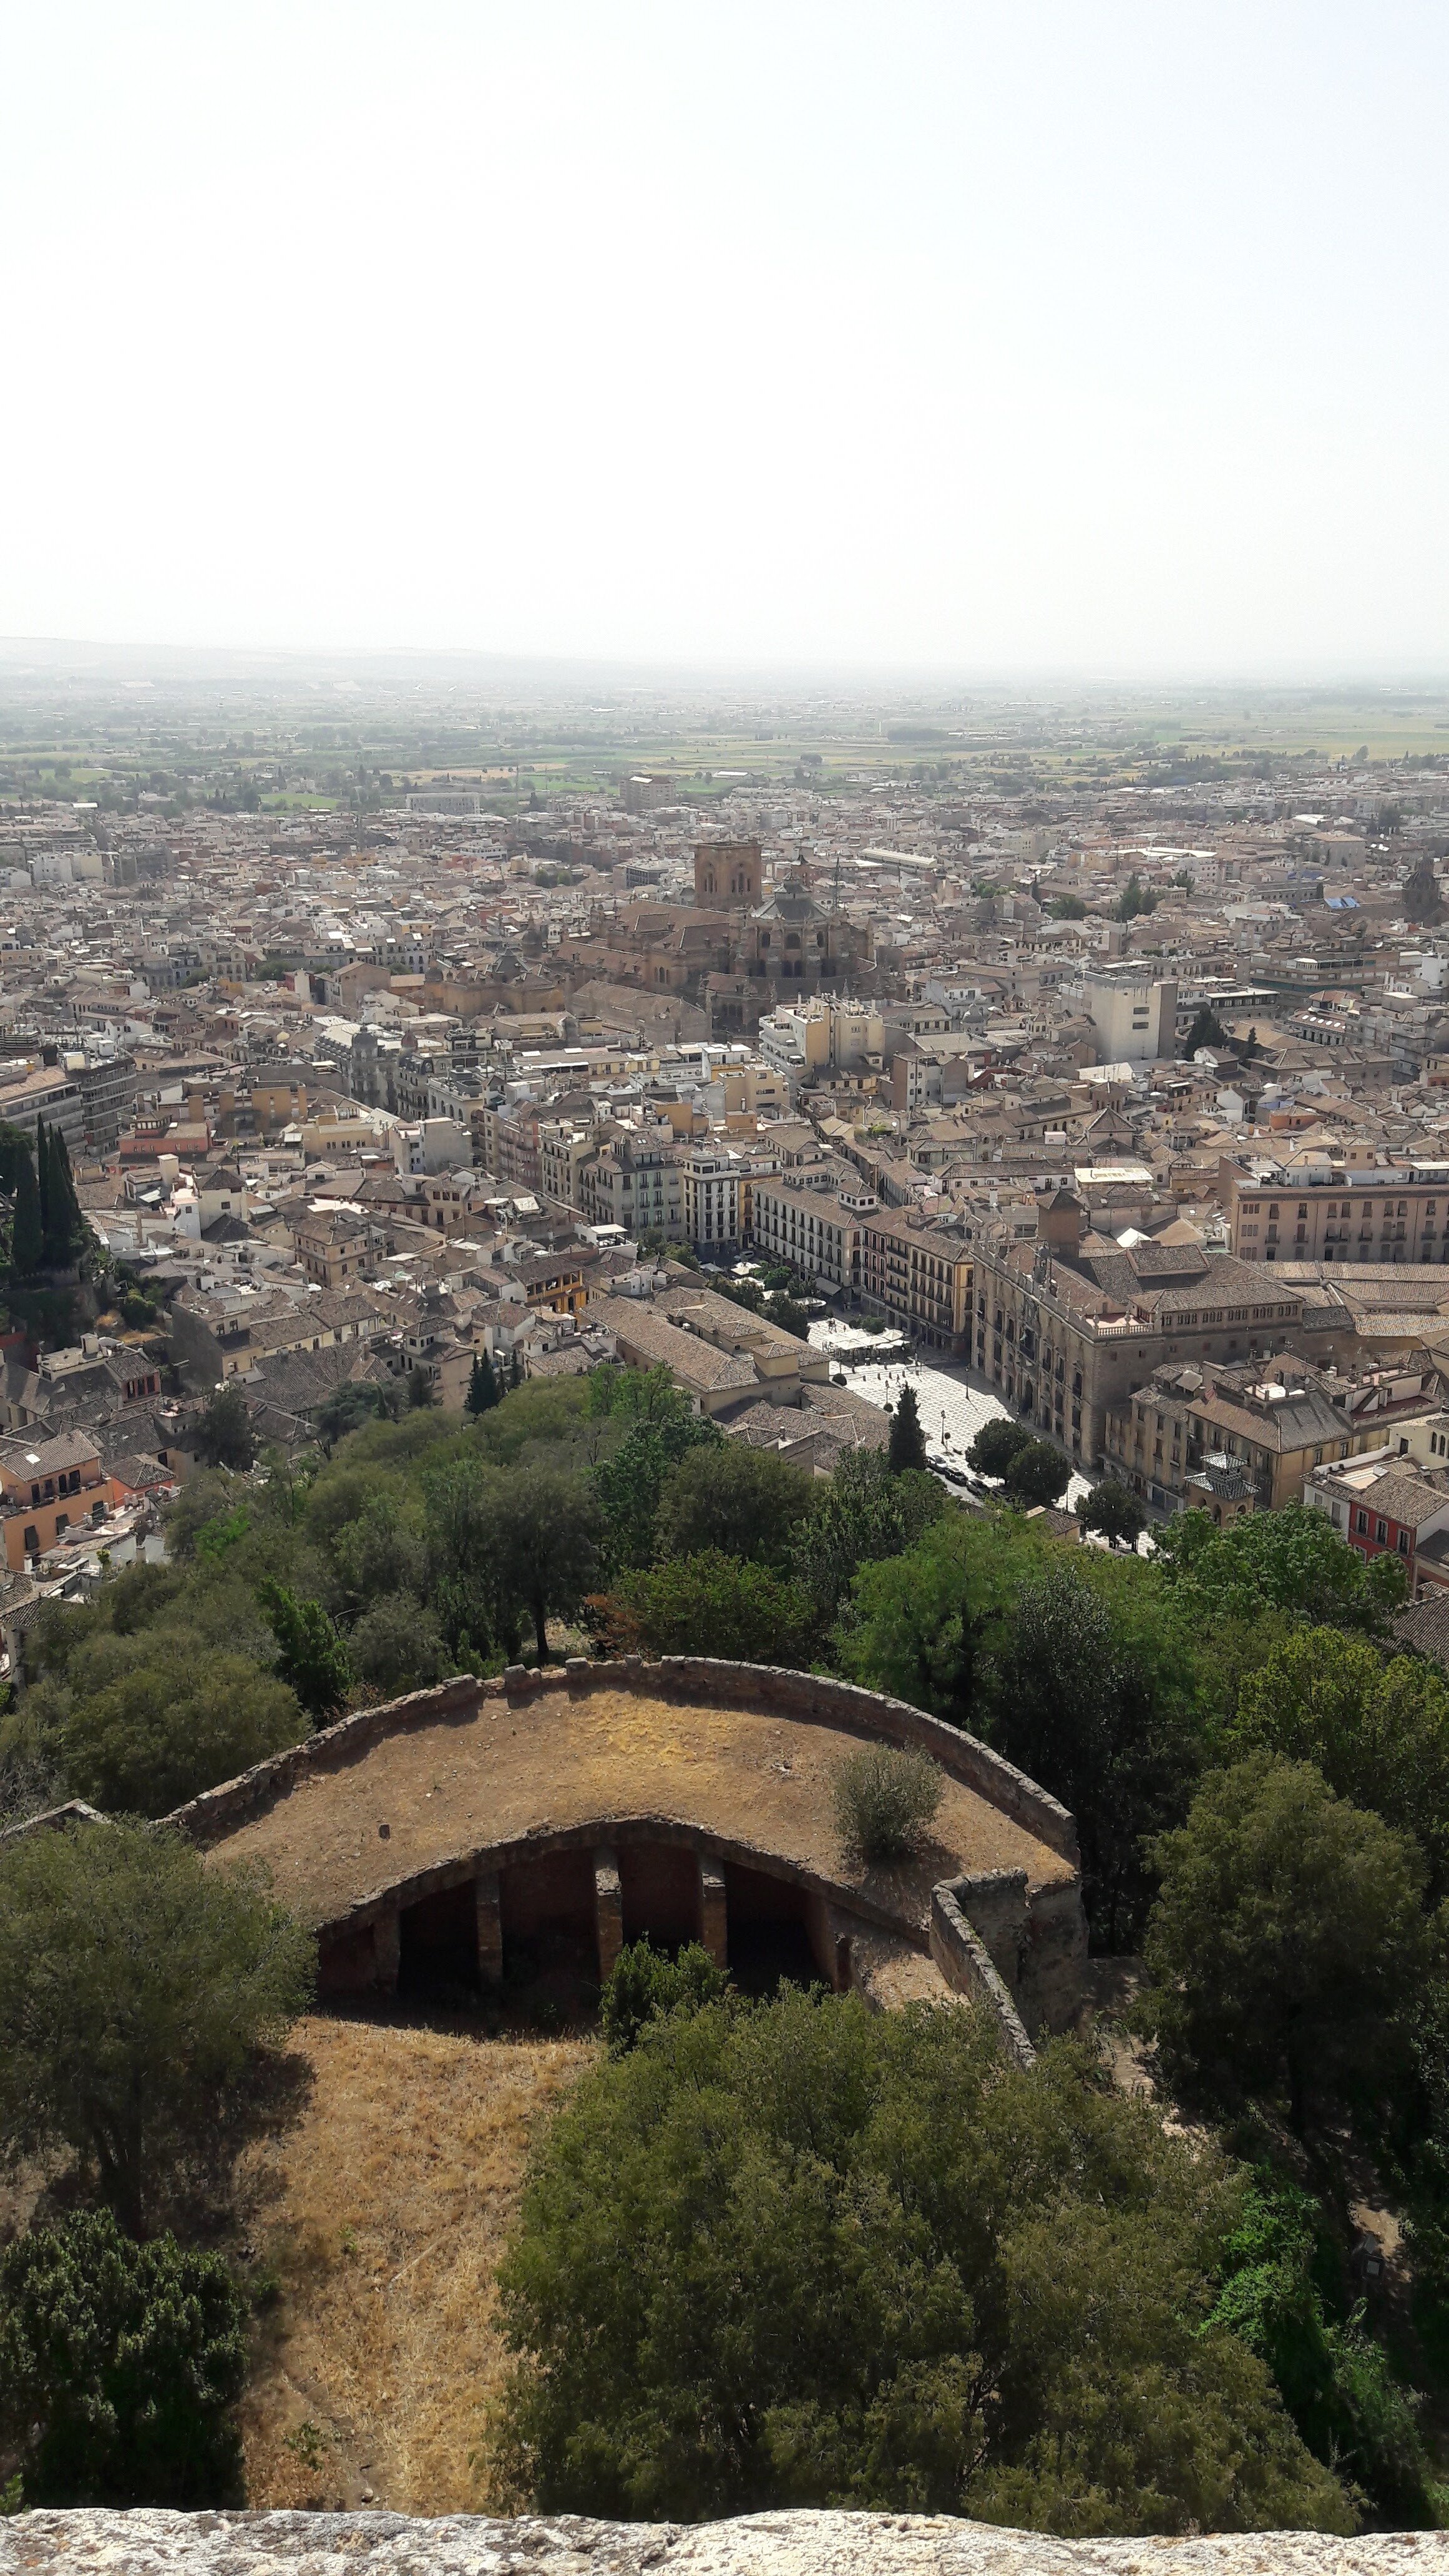 One of the main reasons to check out the Alcazaba is for the view.